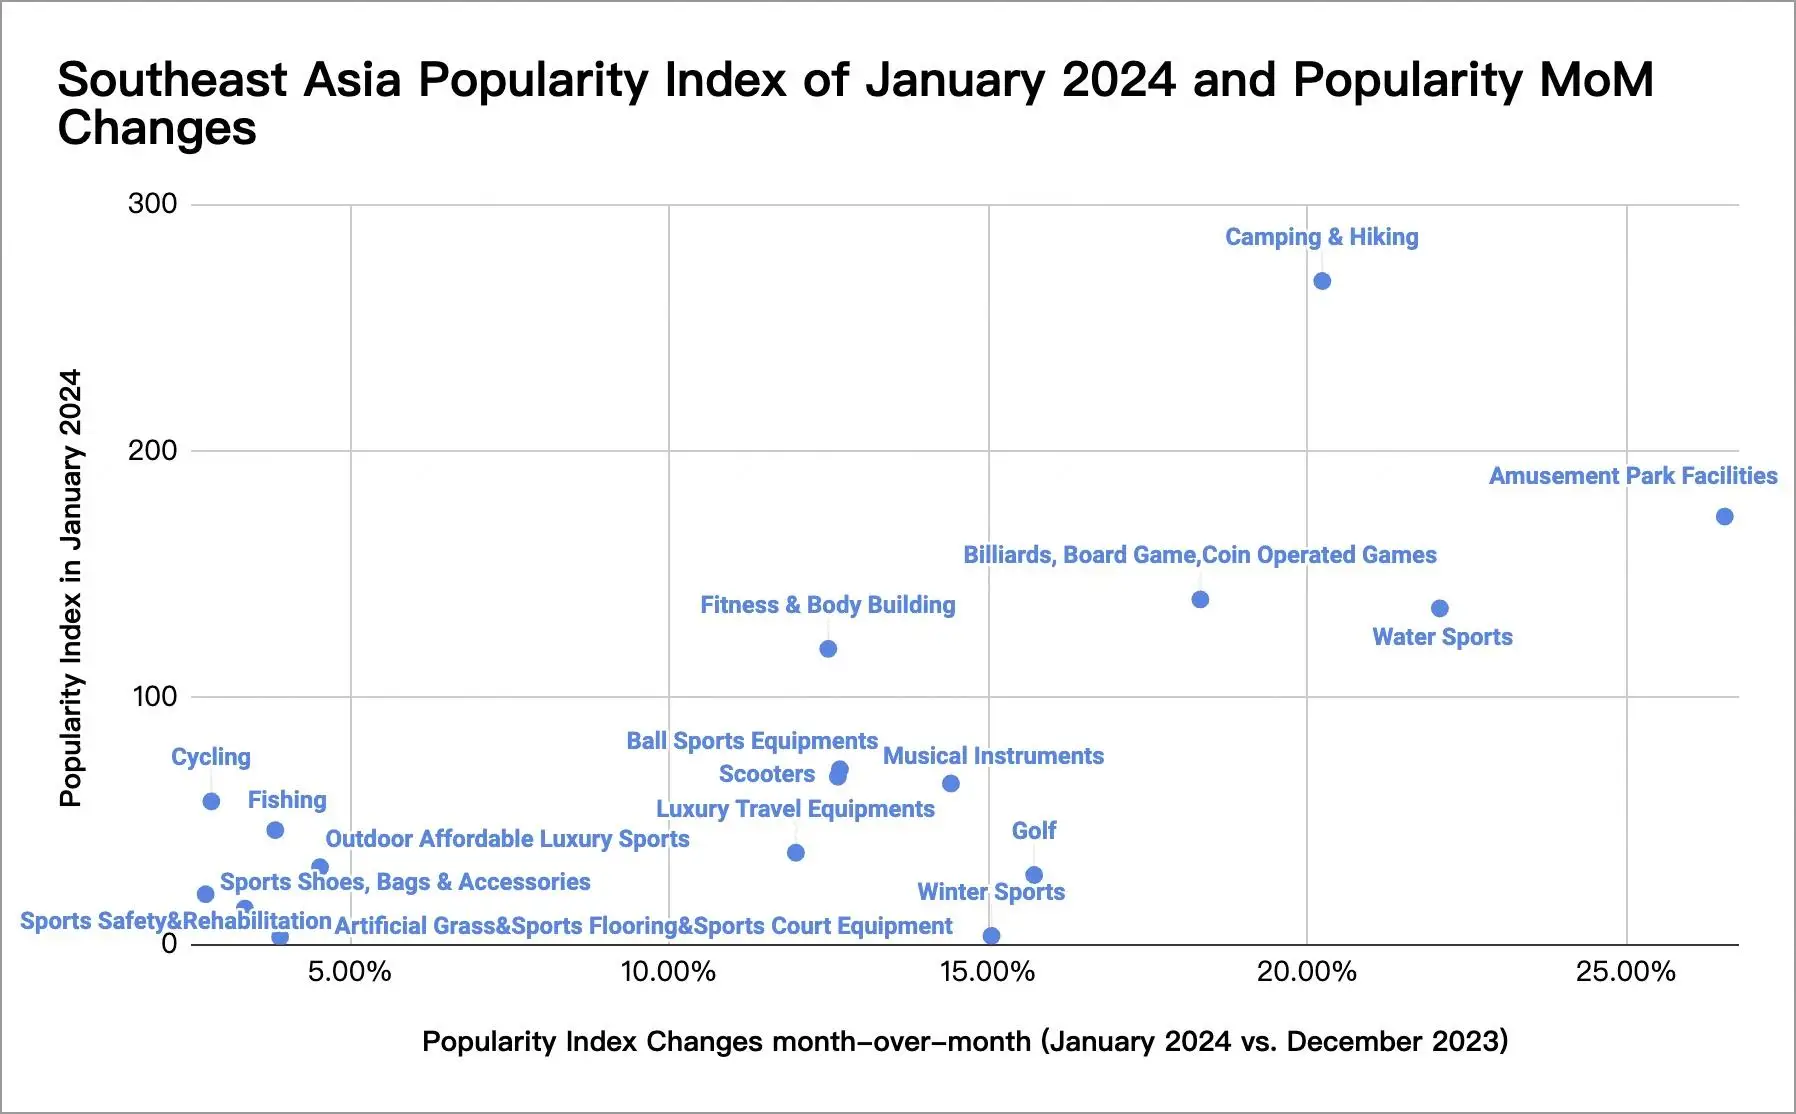 Southeast Asia Popularity Index of January 2024 and Popularity MoM Changes